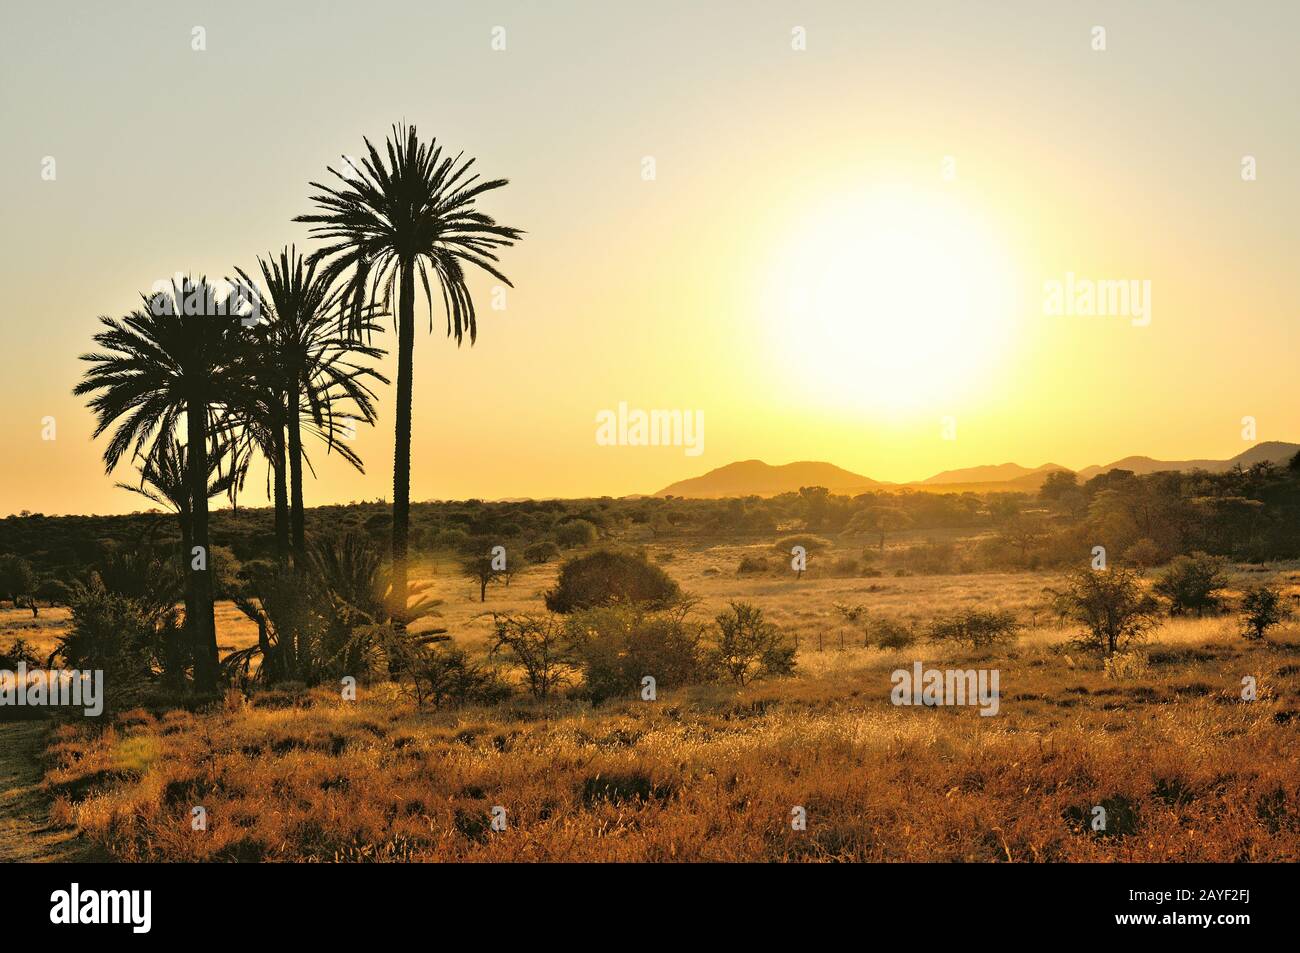 Namibia's sun and landscapes Stock Photo